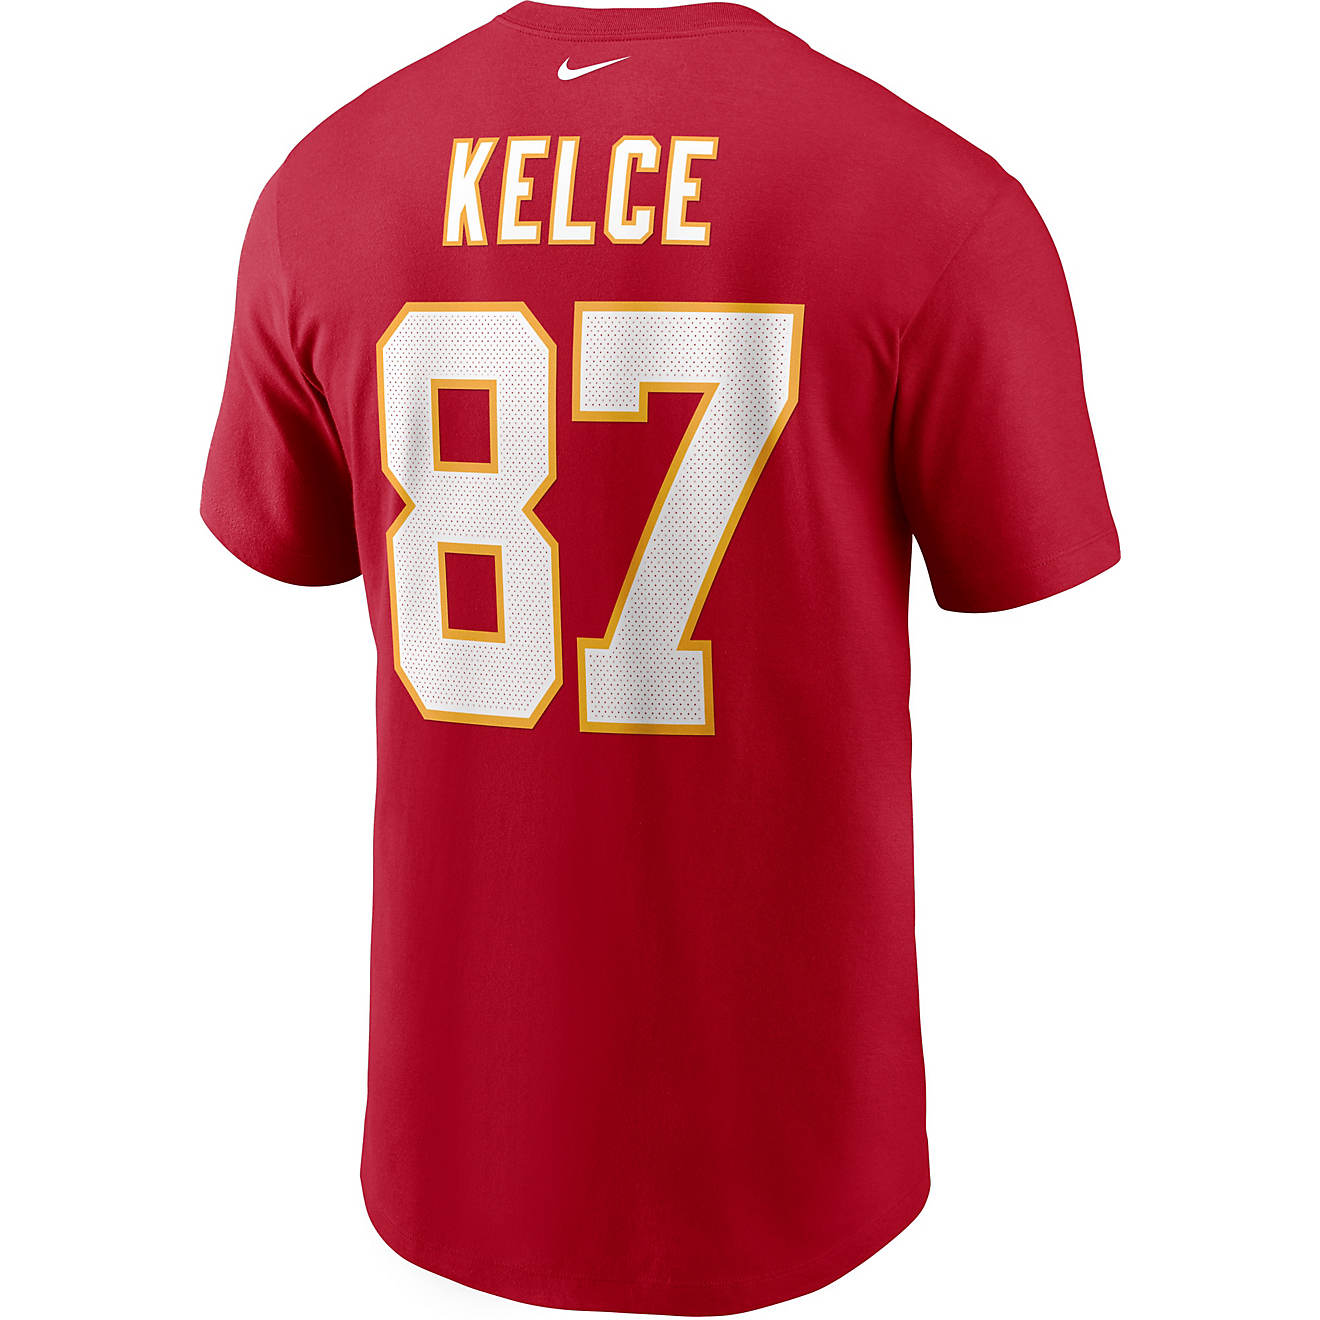 Kansas City Chiefs Themed Casual Athletic Running Shoe Mens Womens Sizes KC Football Apparel and Gifts for Men Women Fan Merchandise 